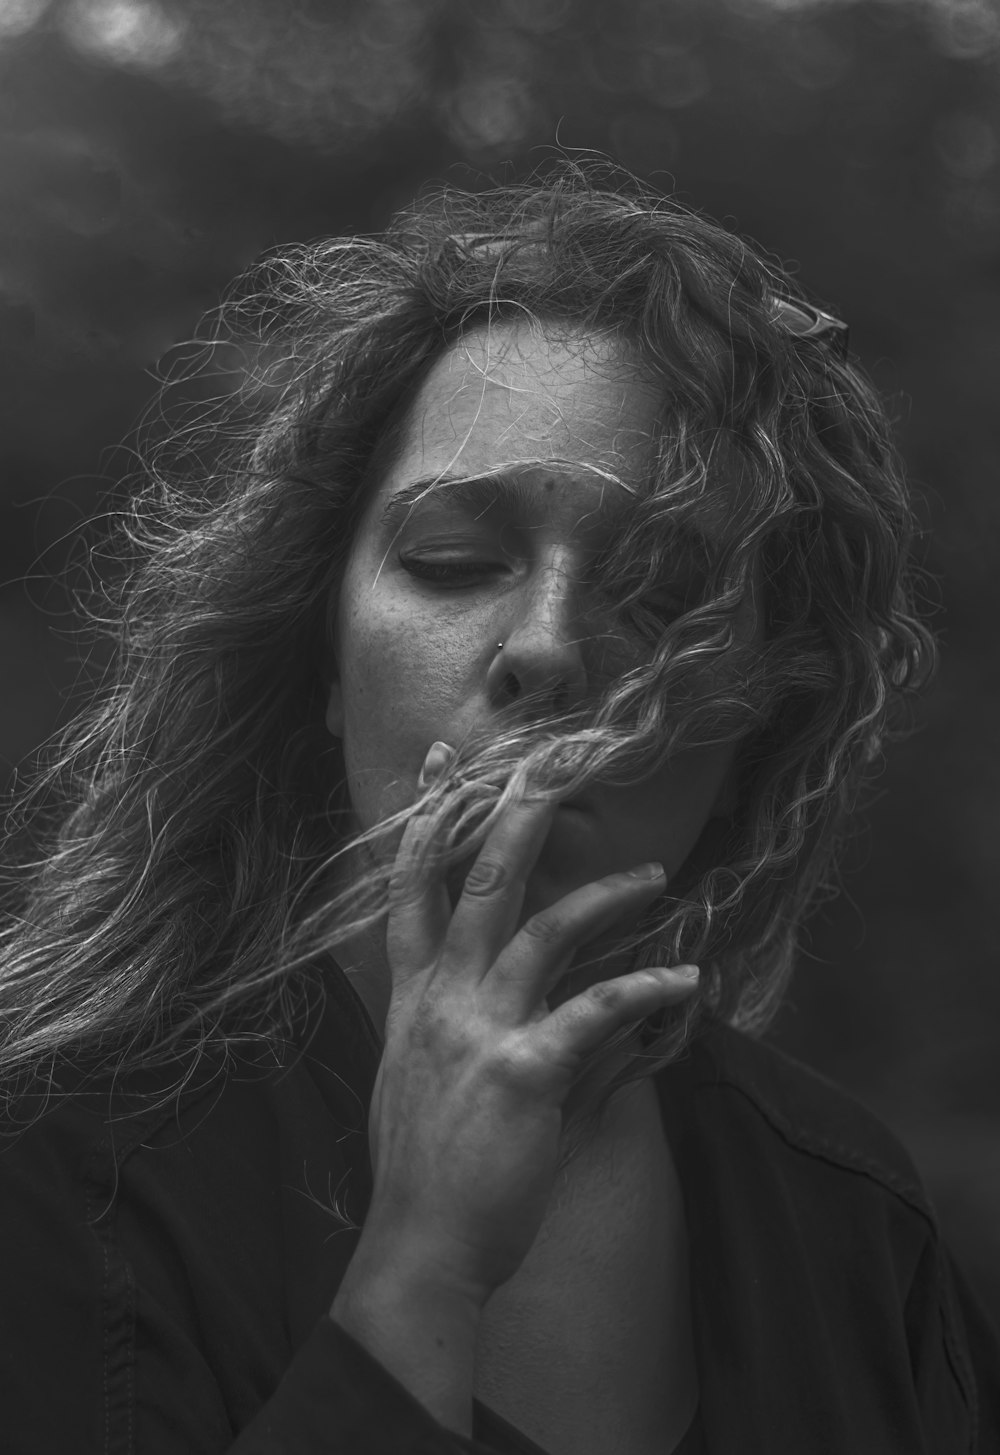 a woman smoking a cigarette in a black and white photo